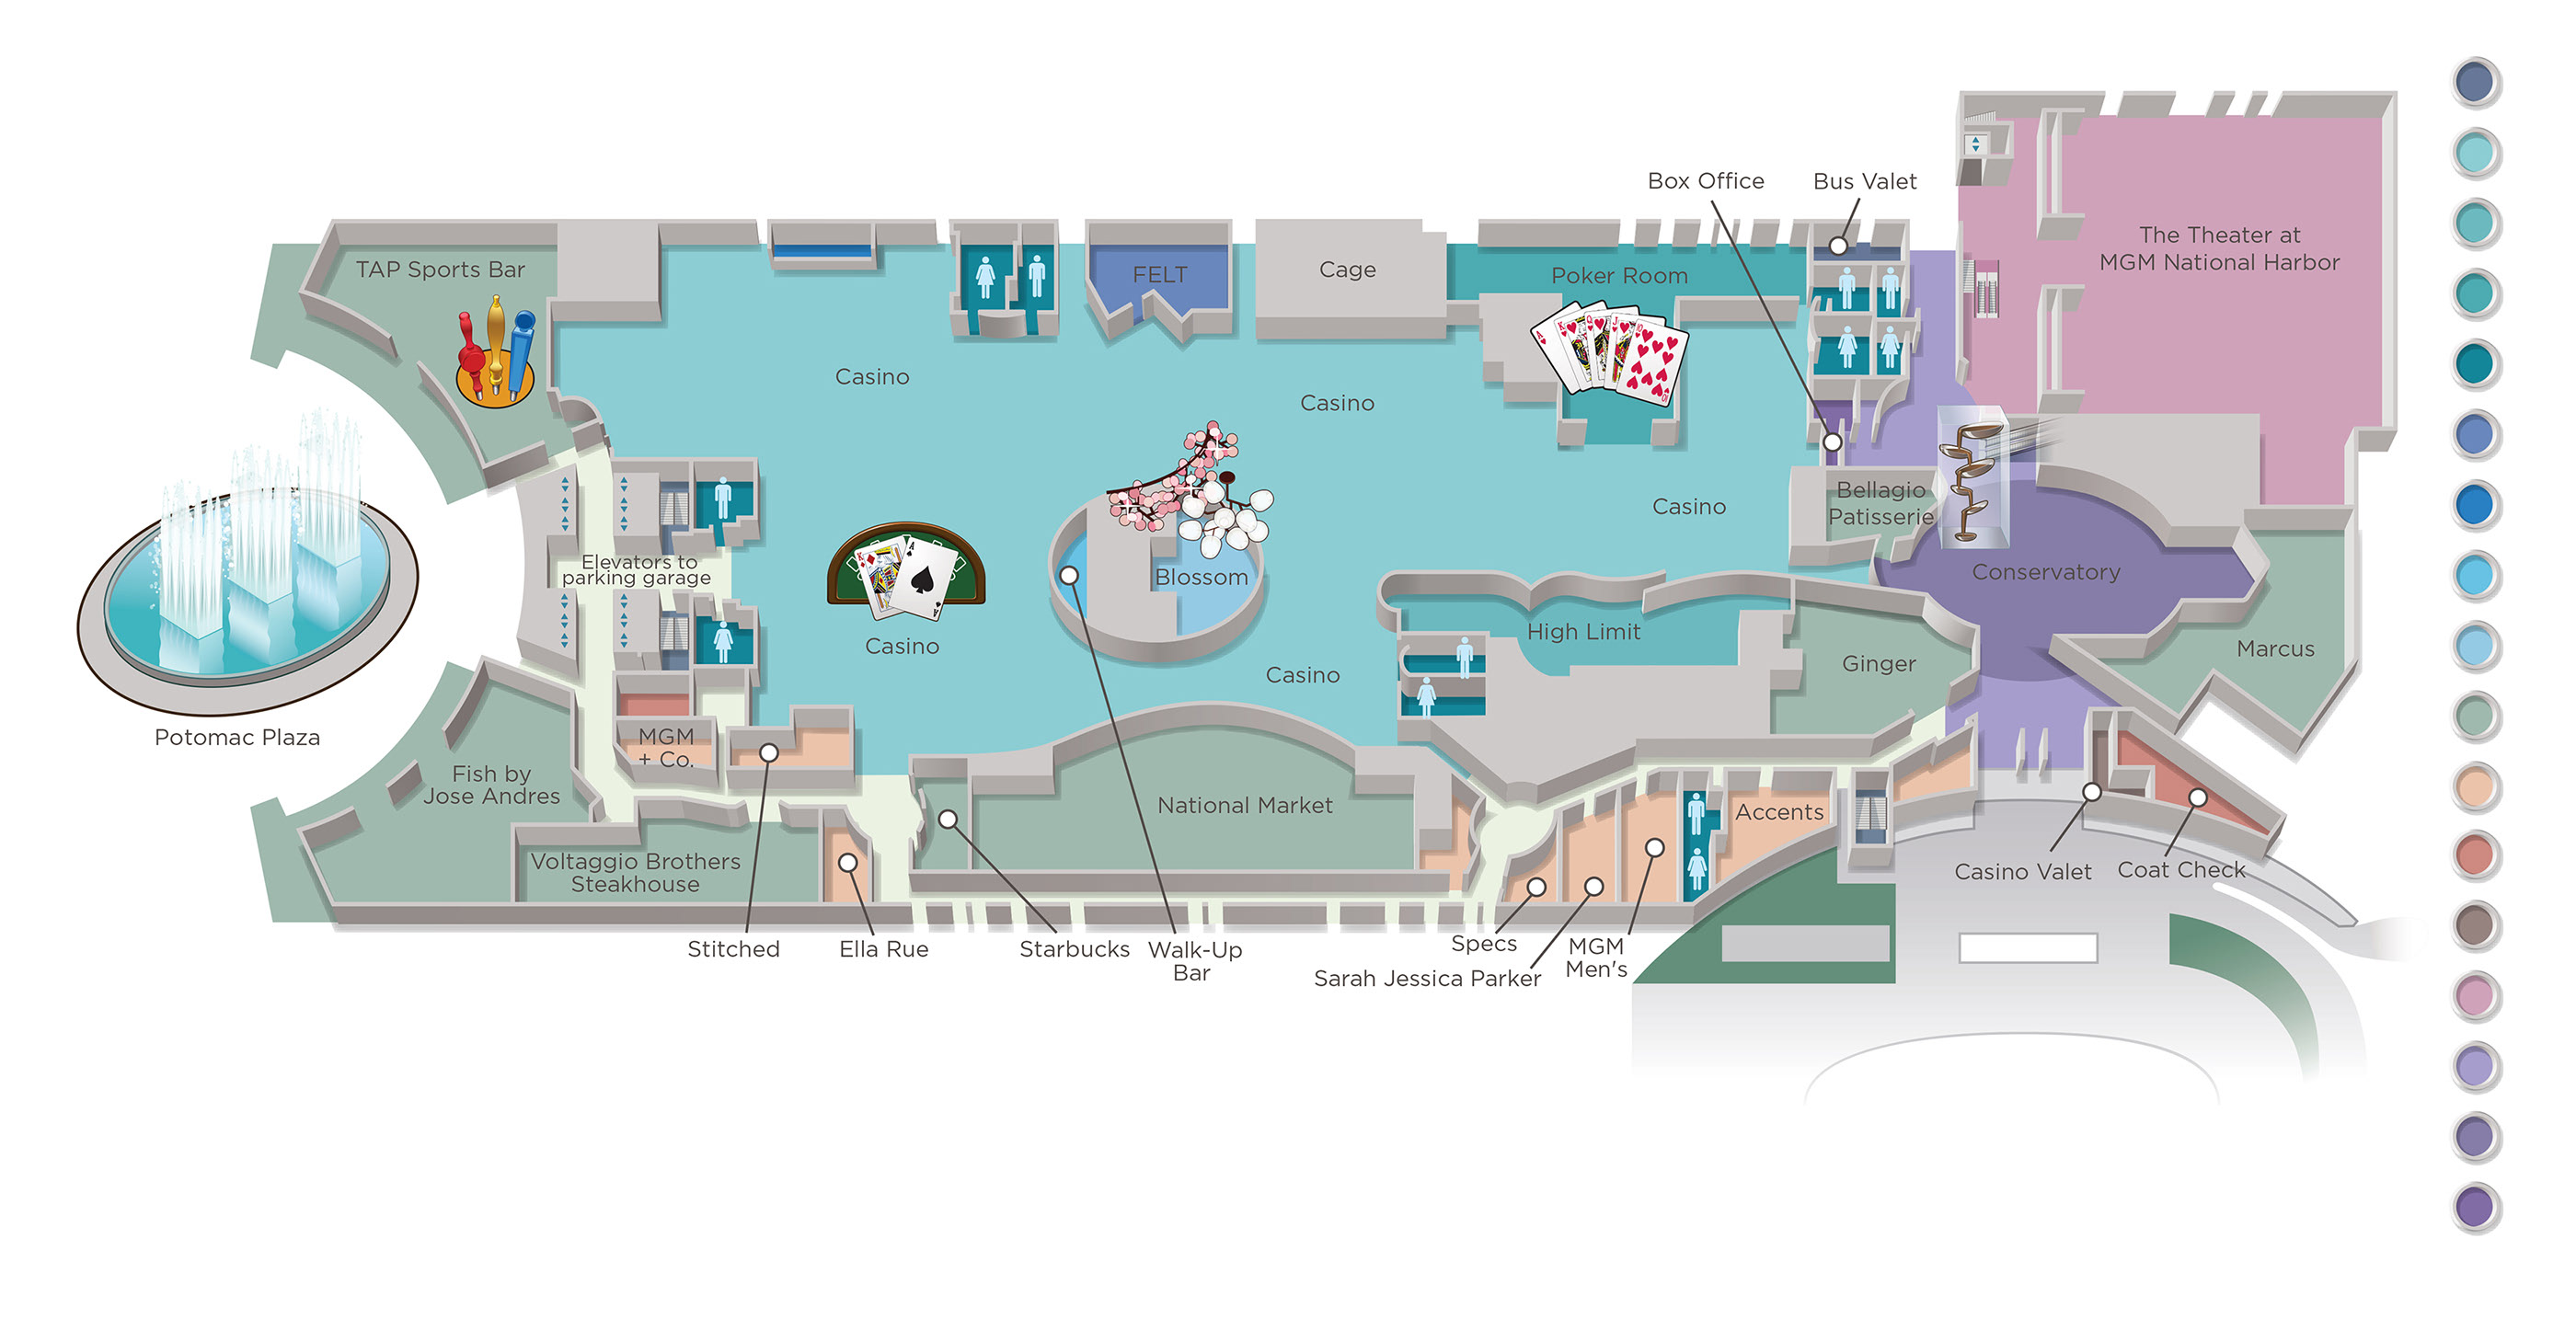 National Harbor Casino Property Guide Map on Behance